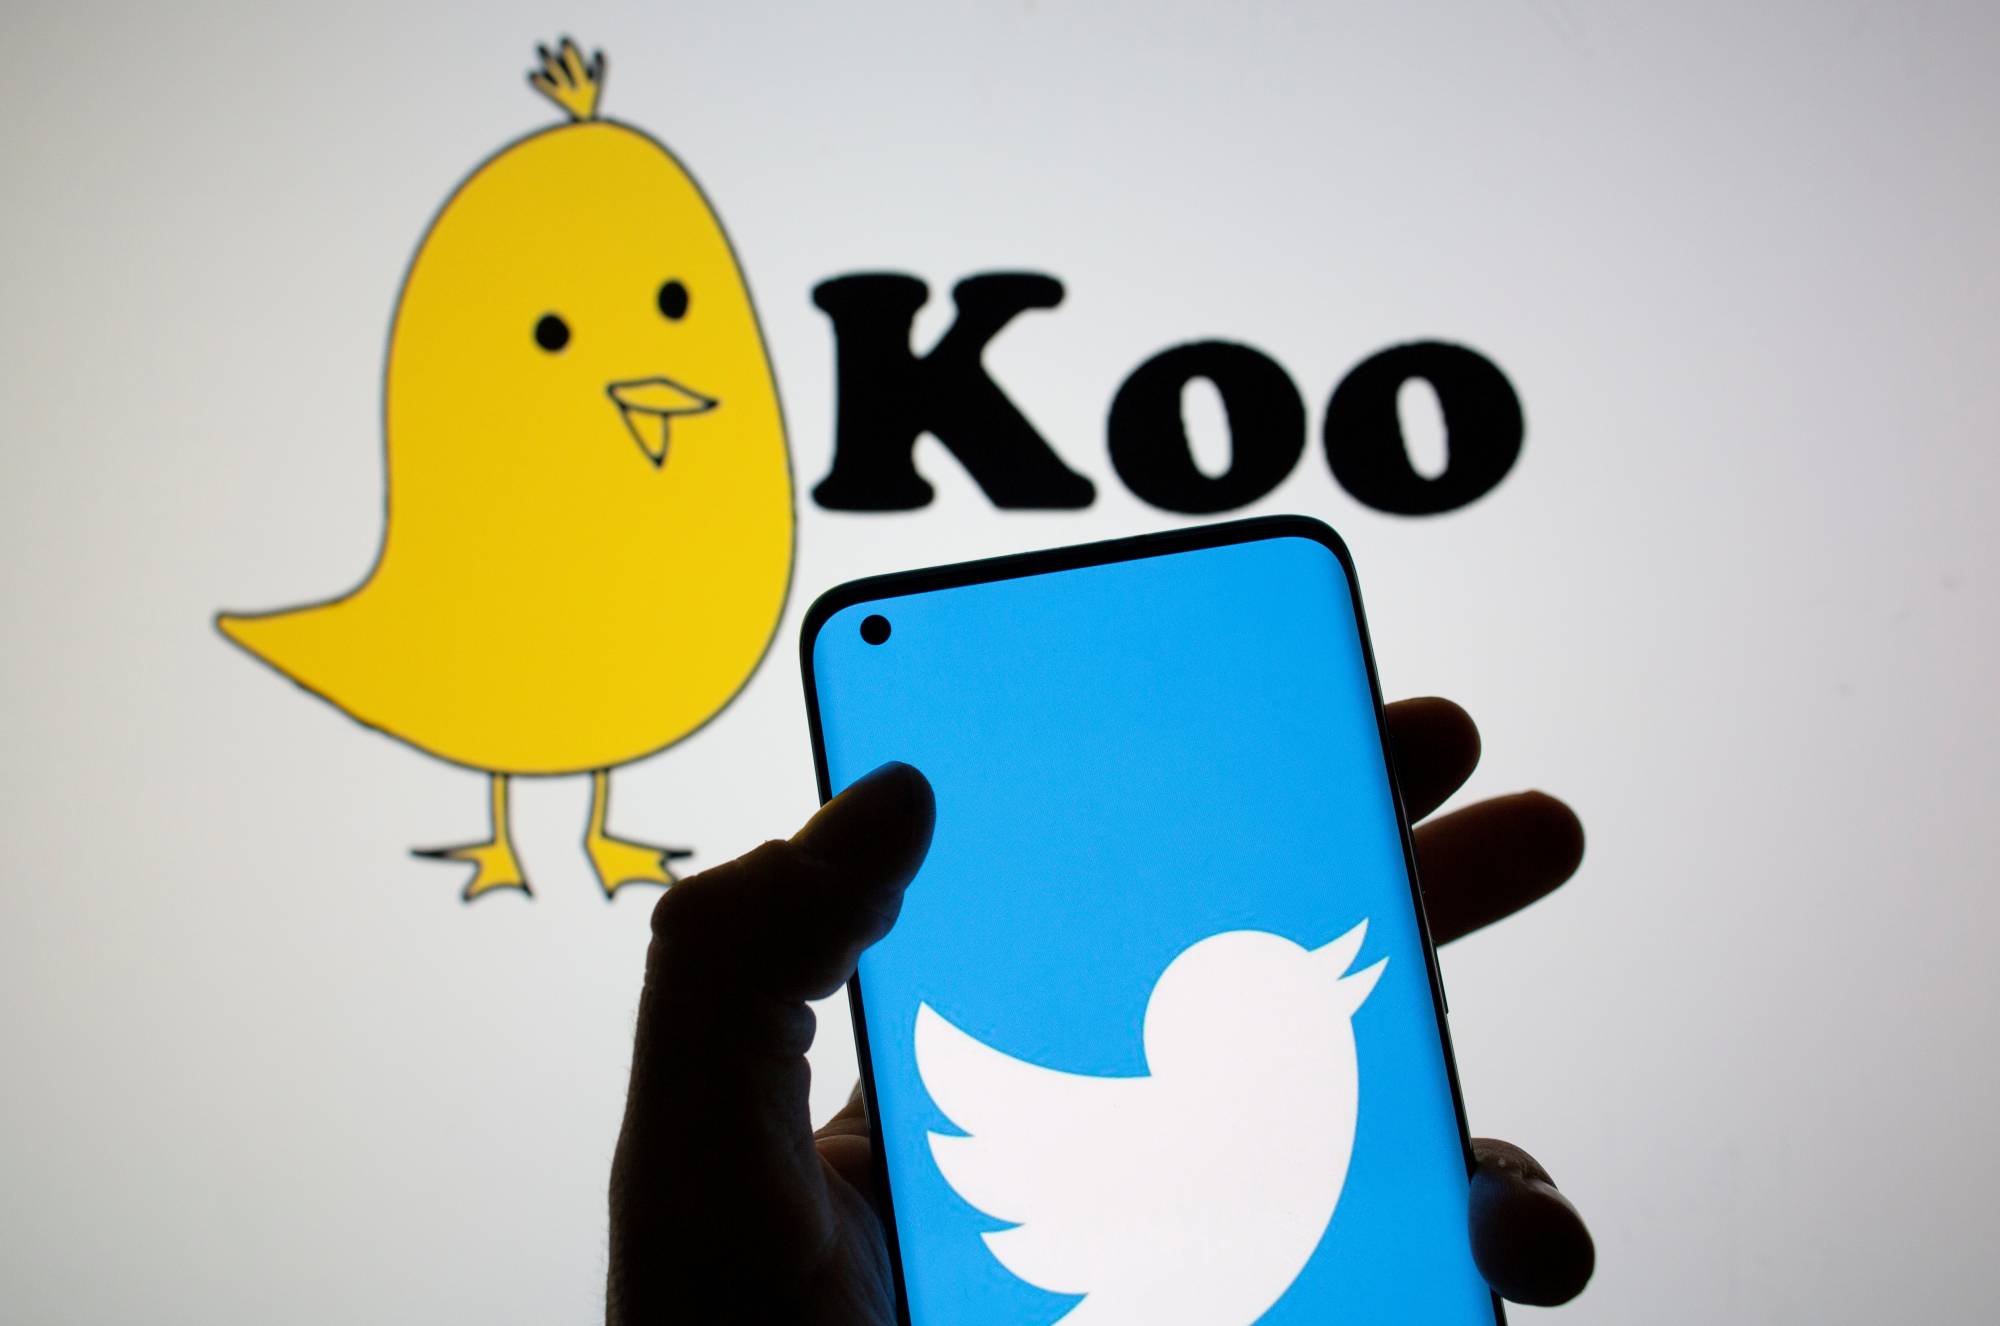 Koo, whose logo of a yellow chick bears a resemblance to Twitter’s blue-and-white bird, was founded just a year ago. | REUTERS